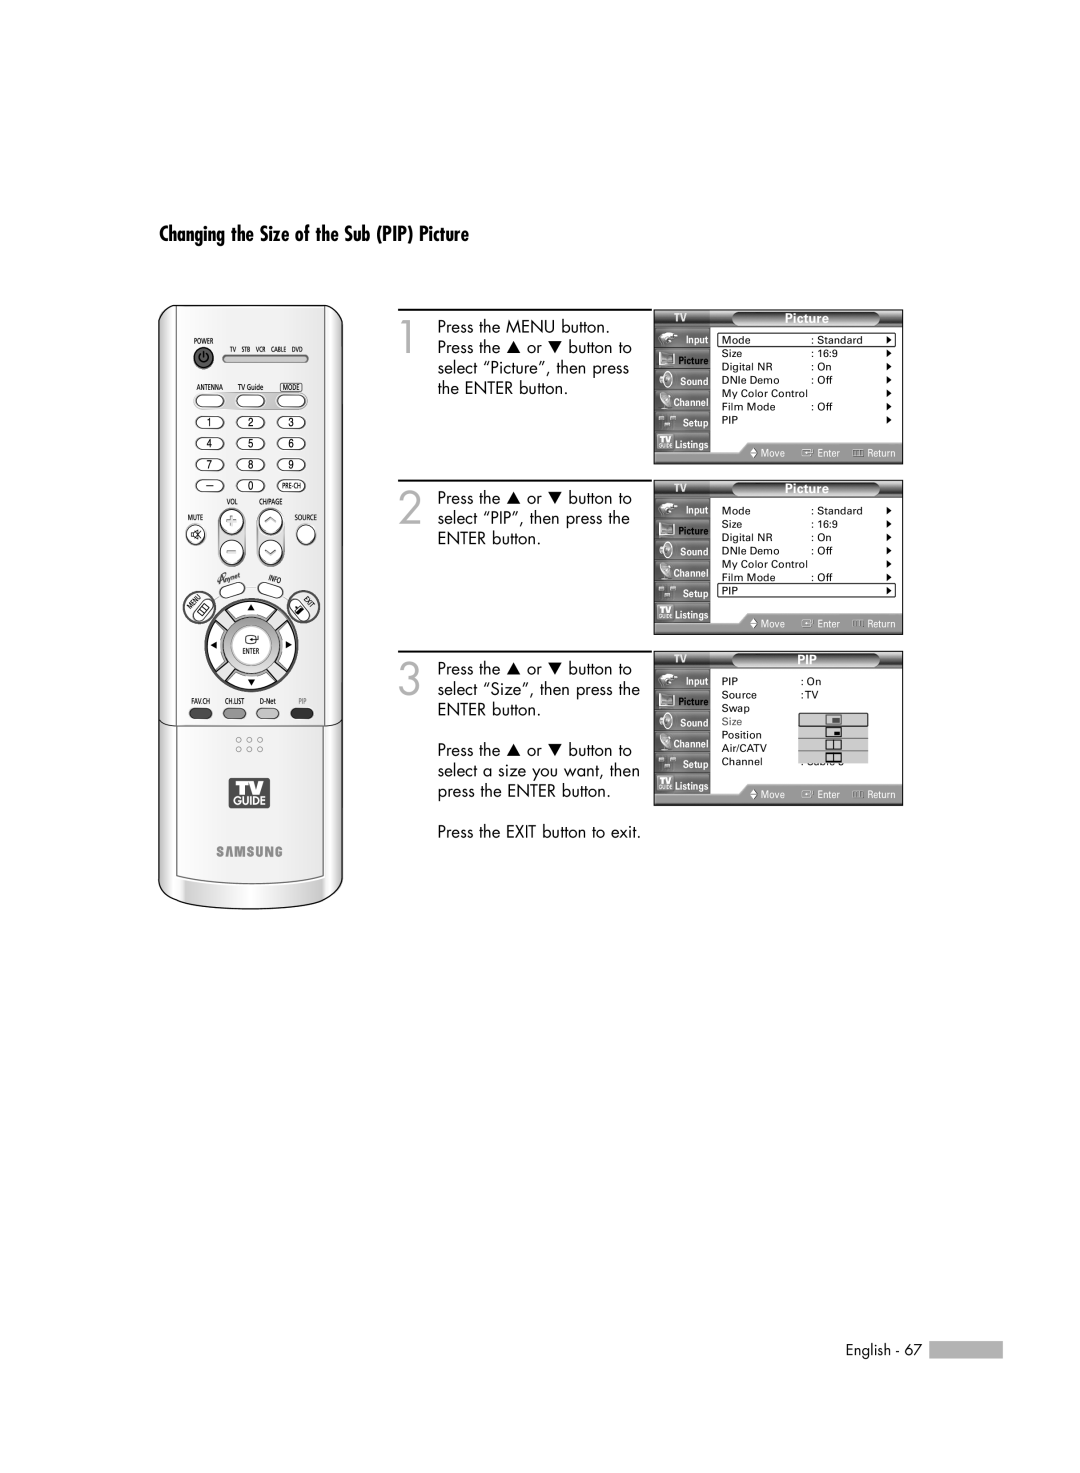 Samsung HL-R5688W manual Changing the Size of the Sub PIP Picture 